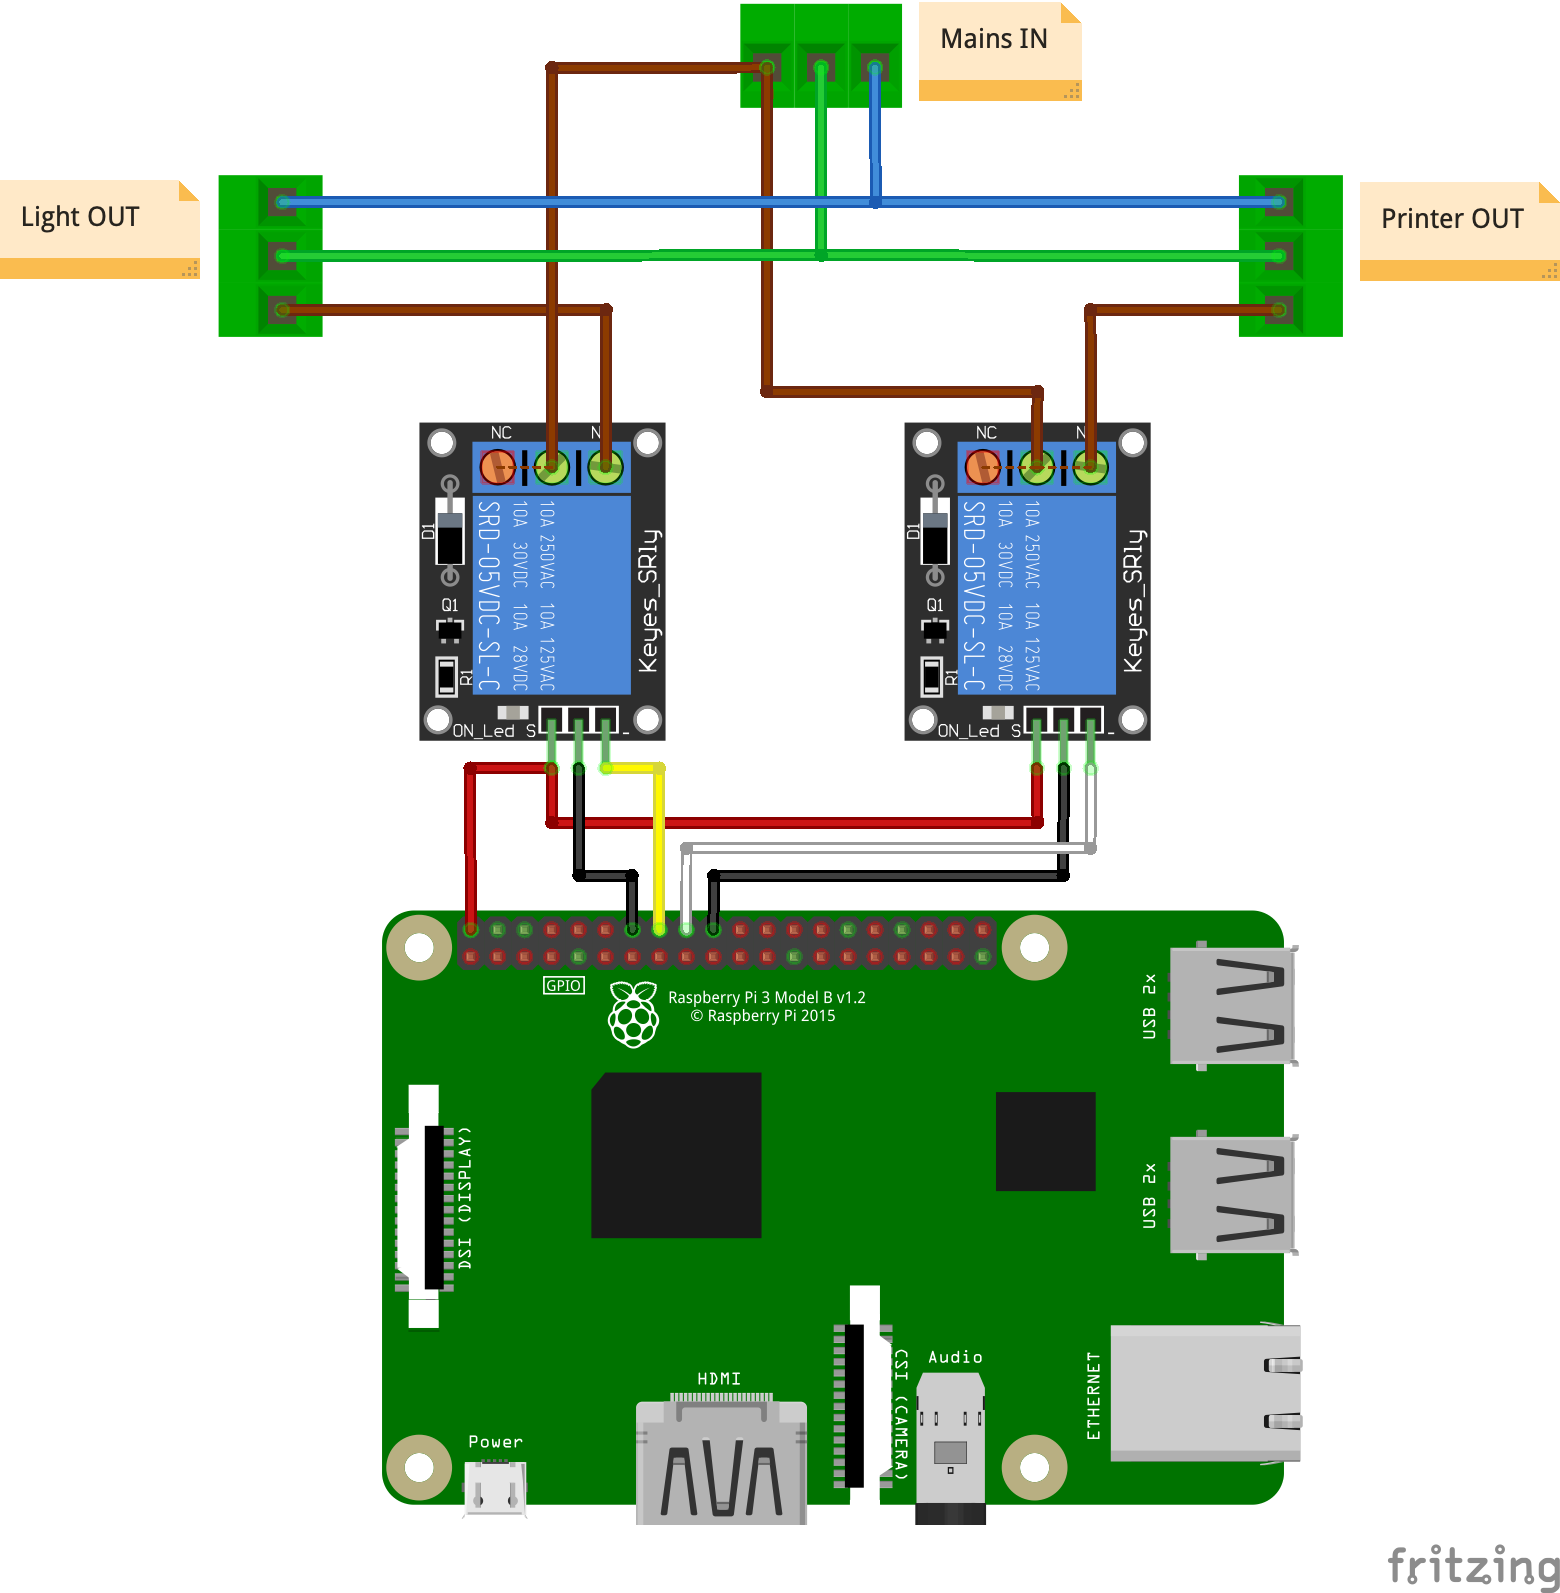 Two relais are needed to be attached to two GPIO ports in order to turn on/off the printer via the plugin